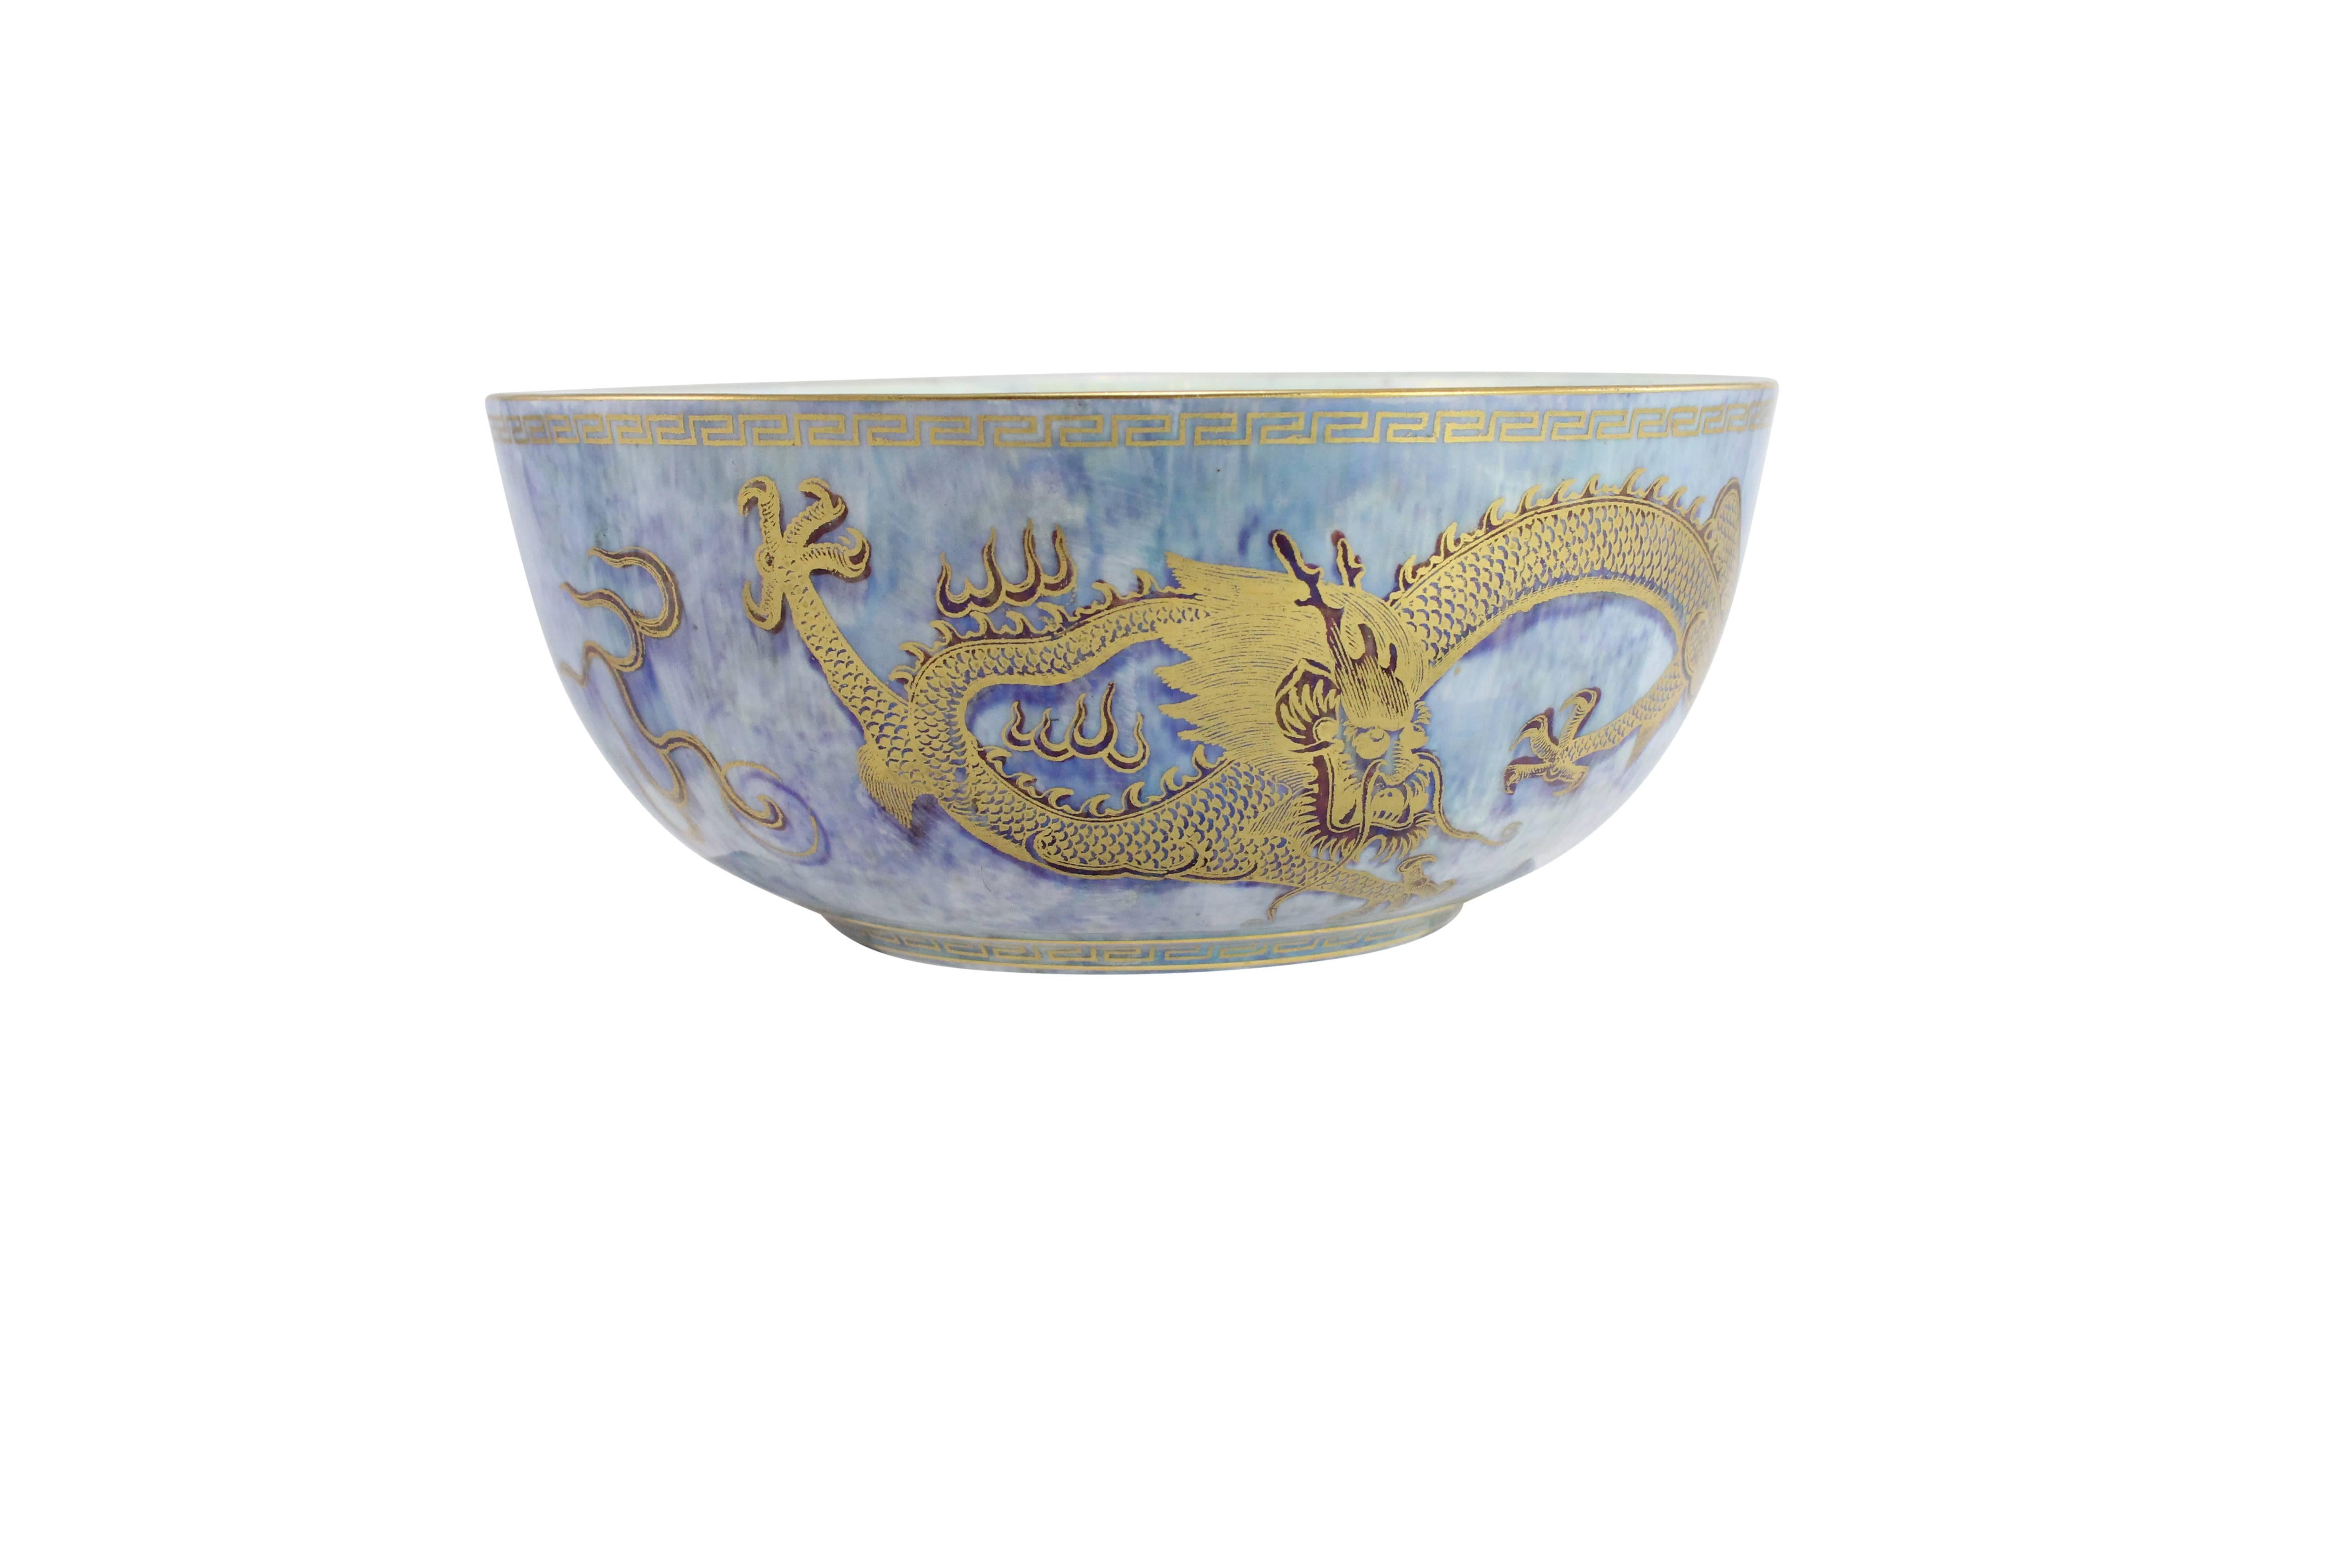 English 'Mythical Creatures' Series Lustreware Bowl by Wedgwood